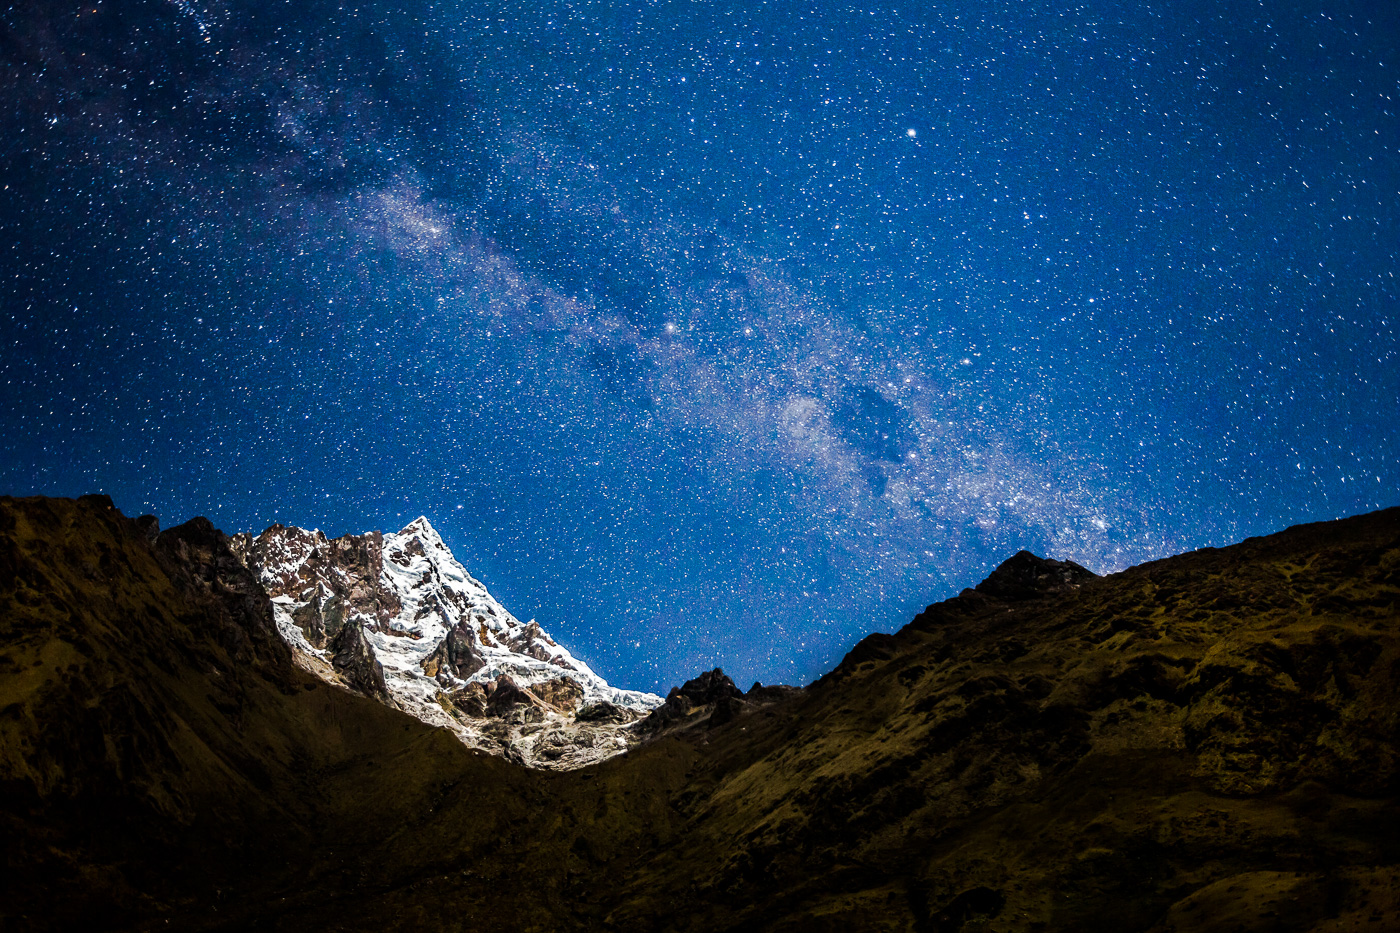 The milky way hangs over the Salkantay mountain during our trek to Machu Picchu.